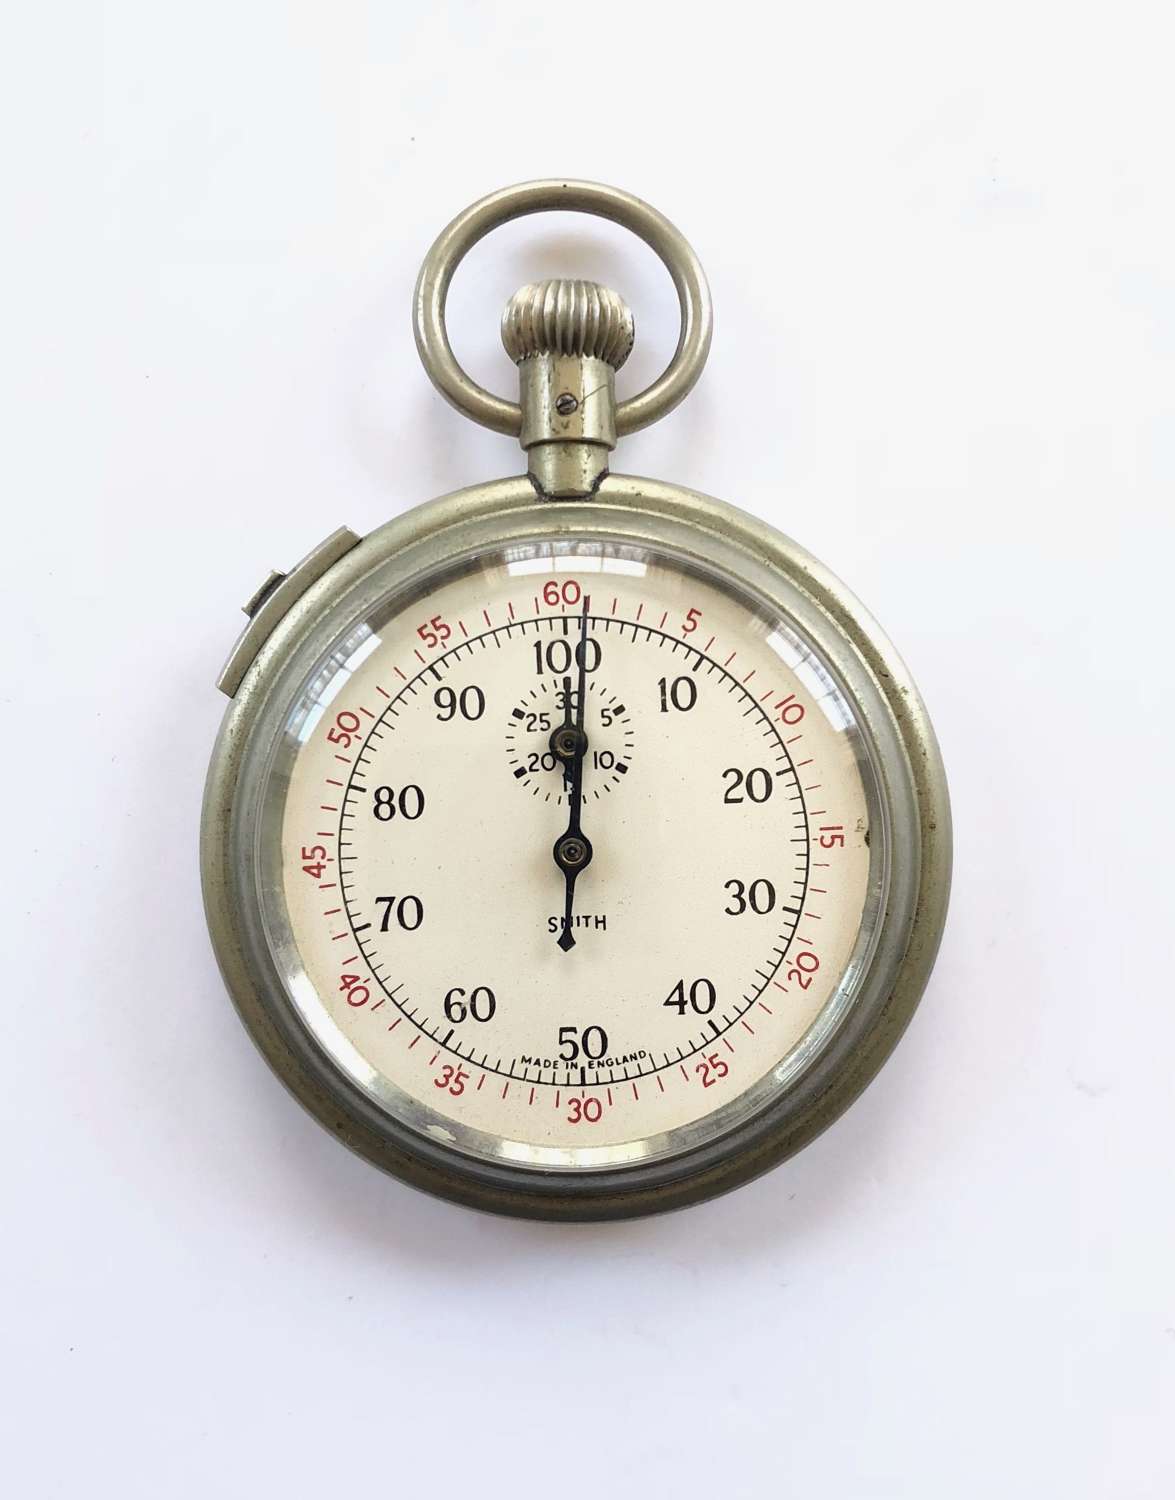 Vintage Stopwatch by Smith.